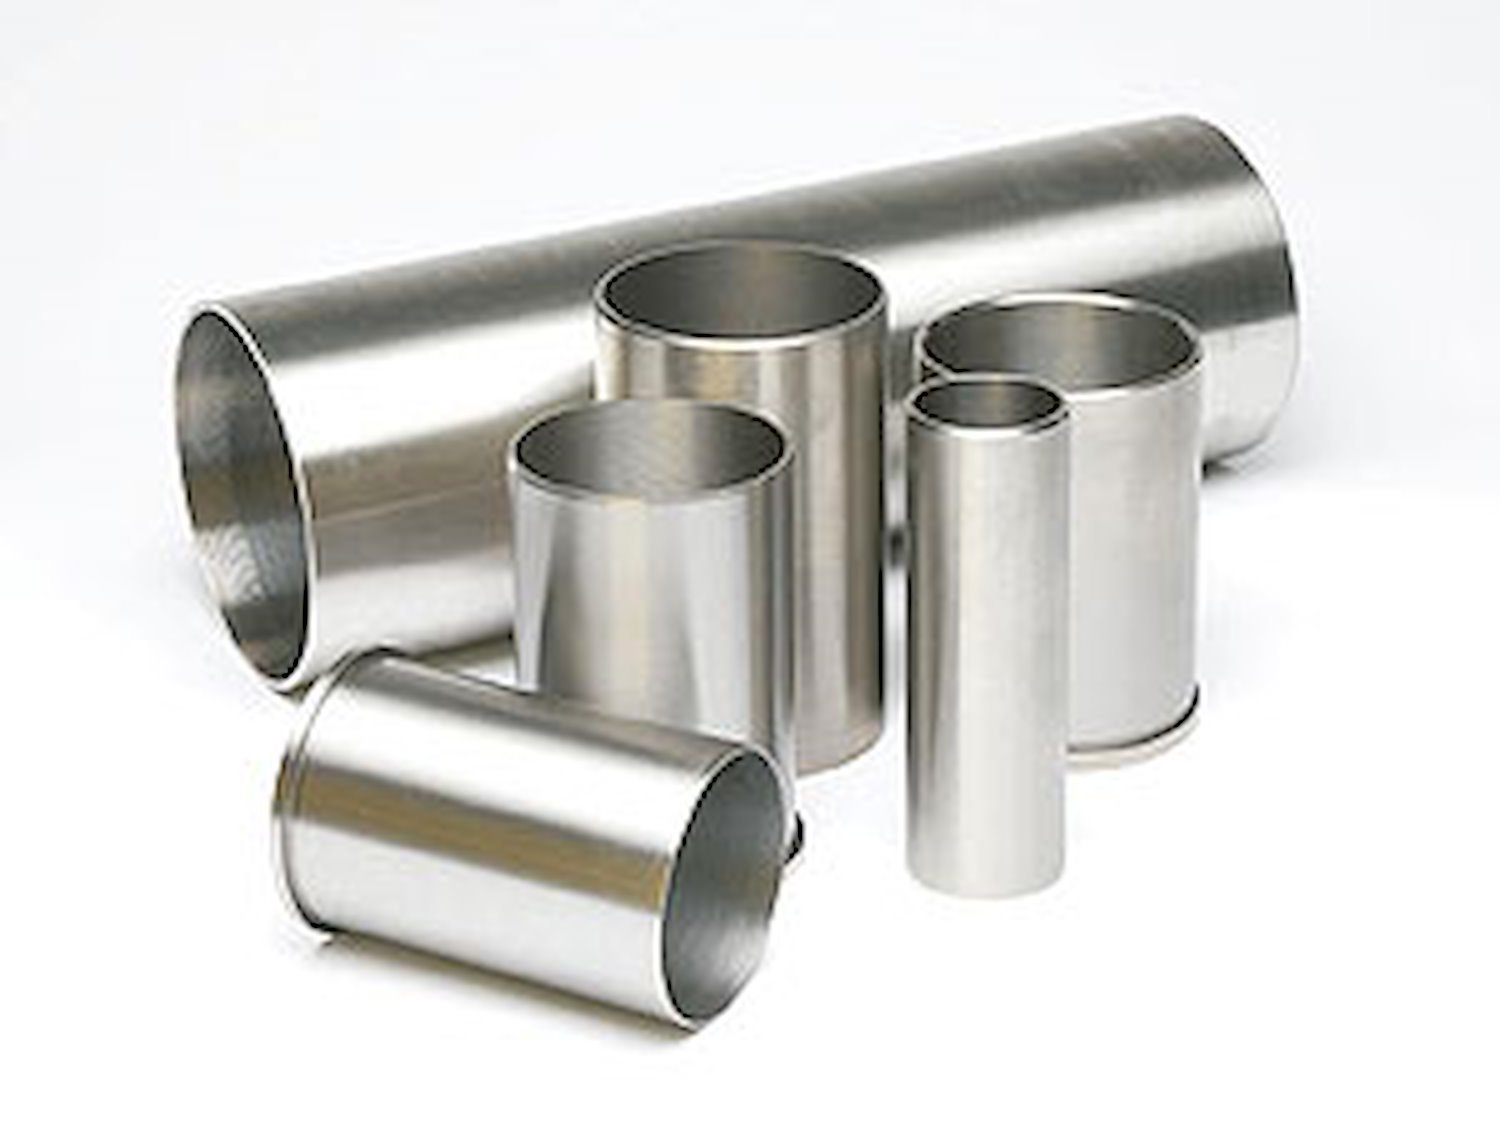 Cylinder Sleeve Bore: 2.9720" Length: 5-1/8" Wall Thickness: 1/8"